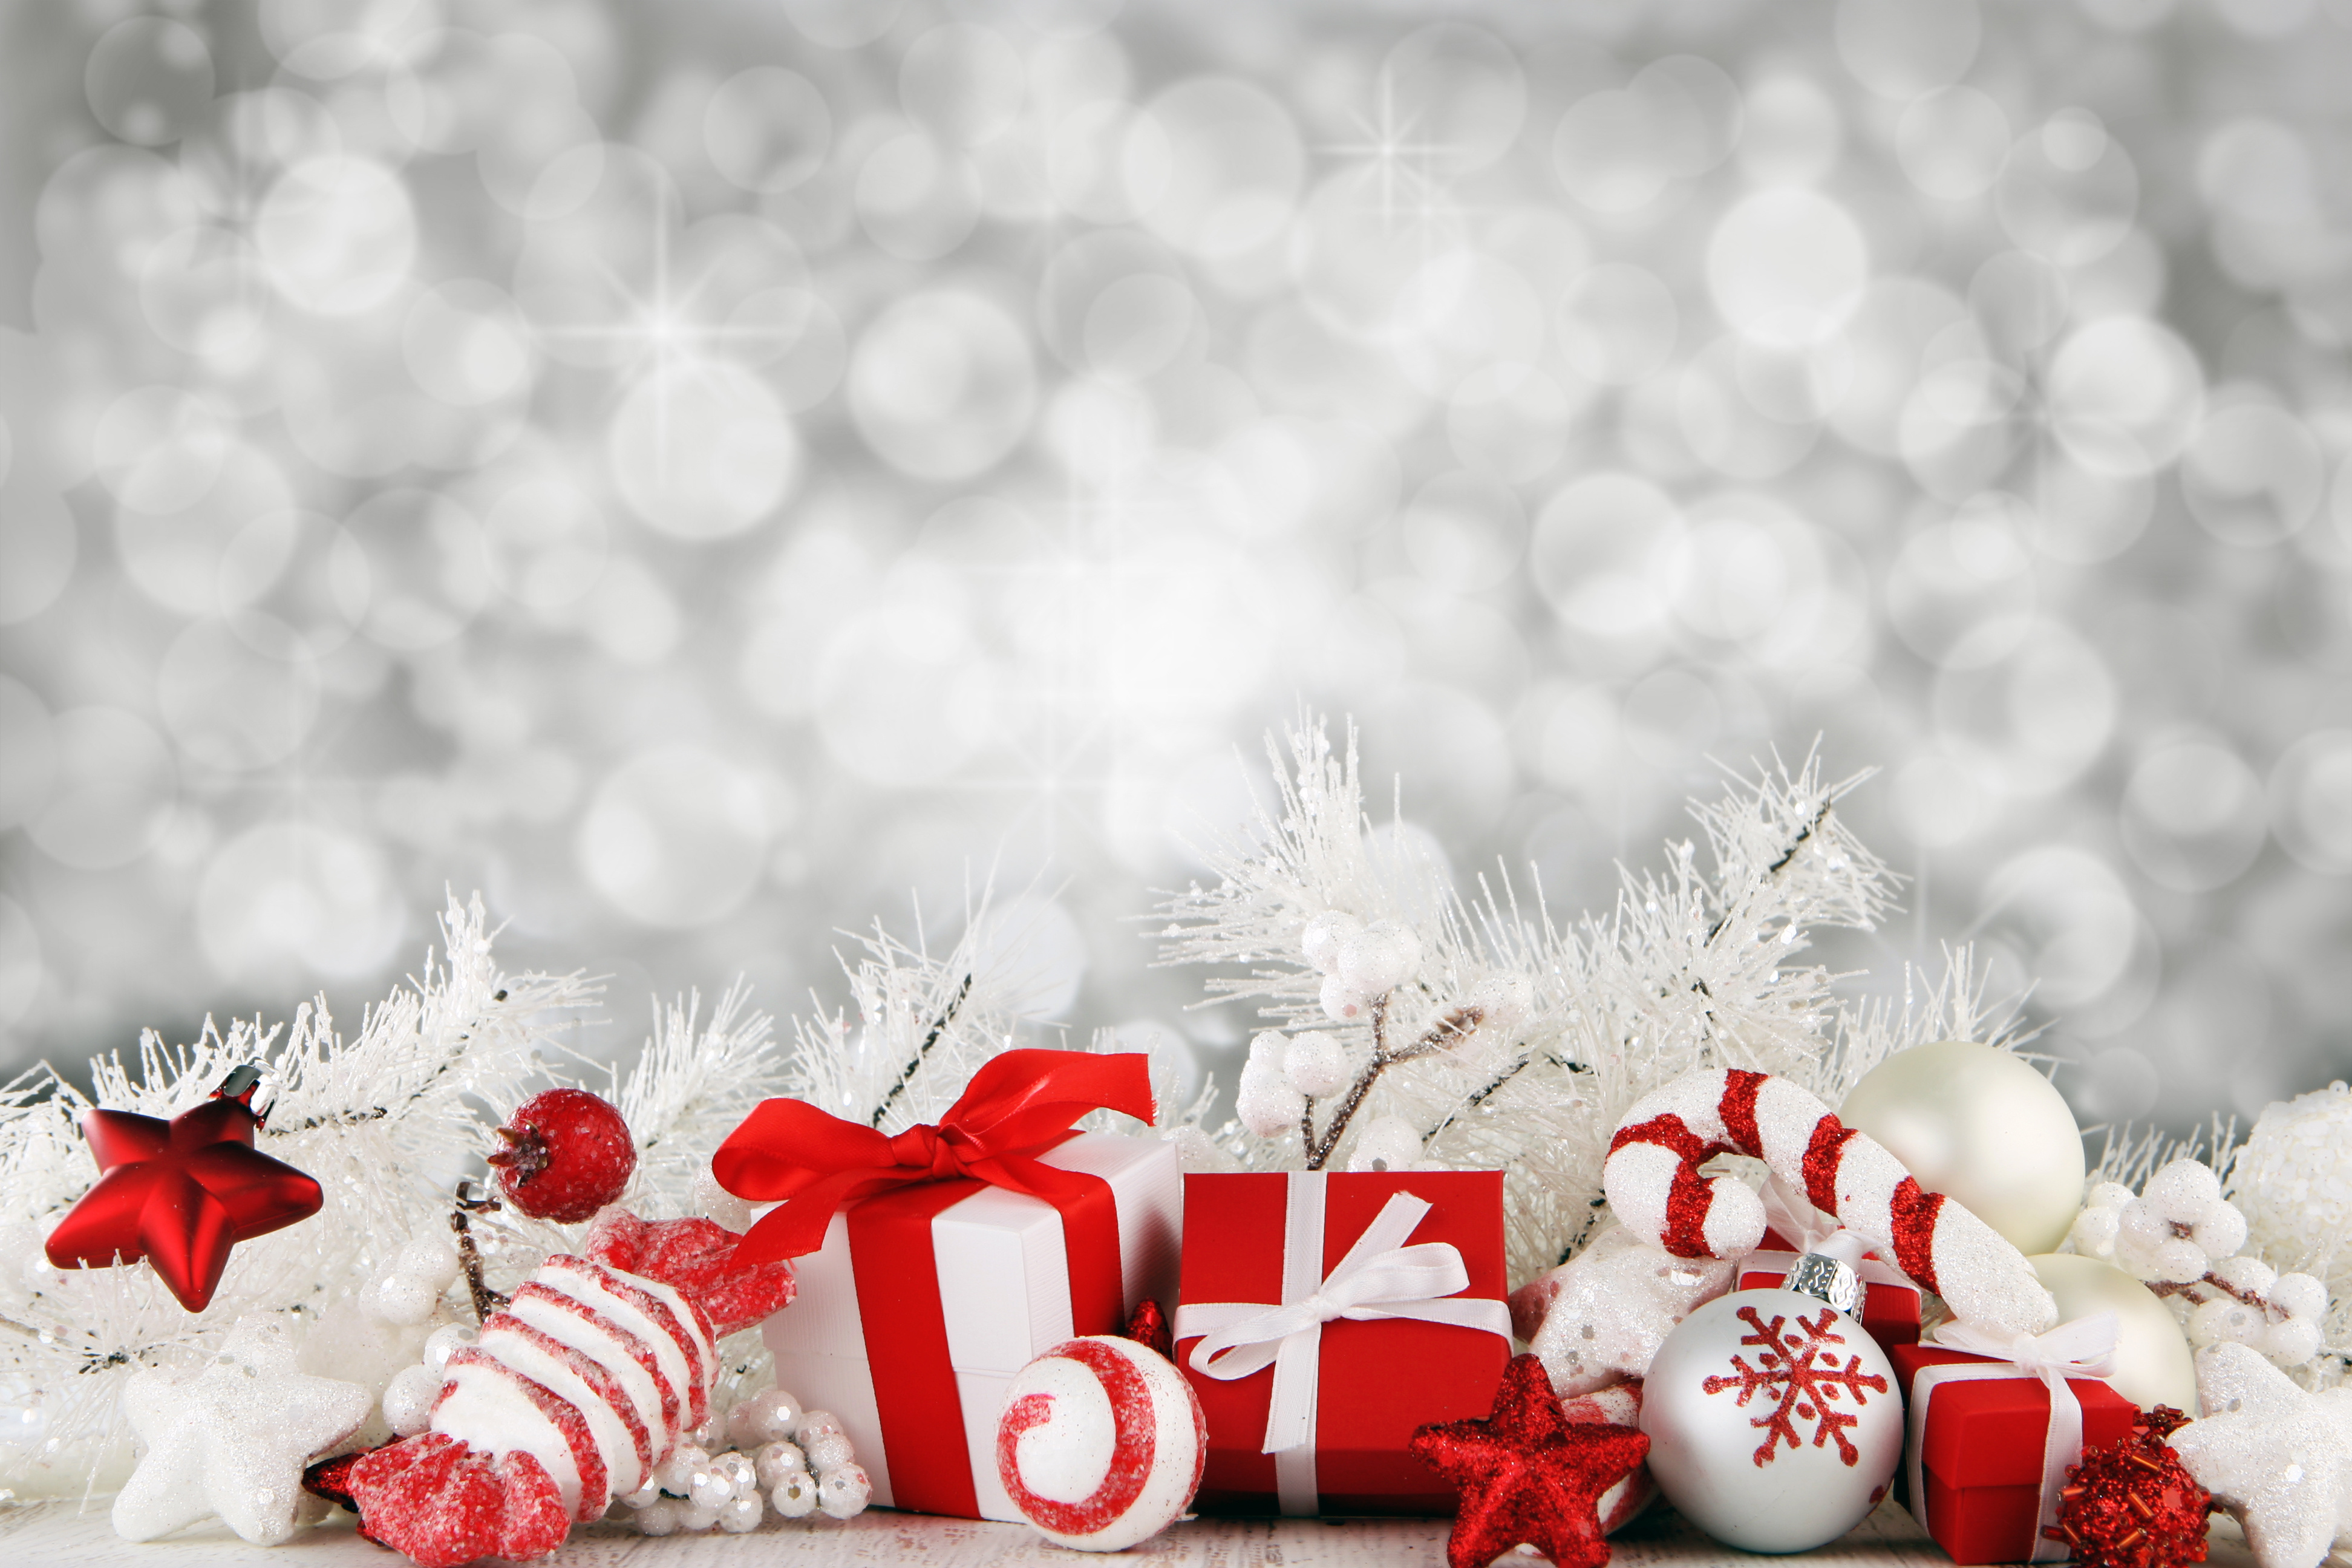 2015 Christmas Backgrounds - Wallpapers, Pics, Pictures, Images